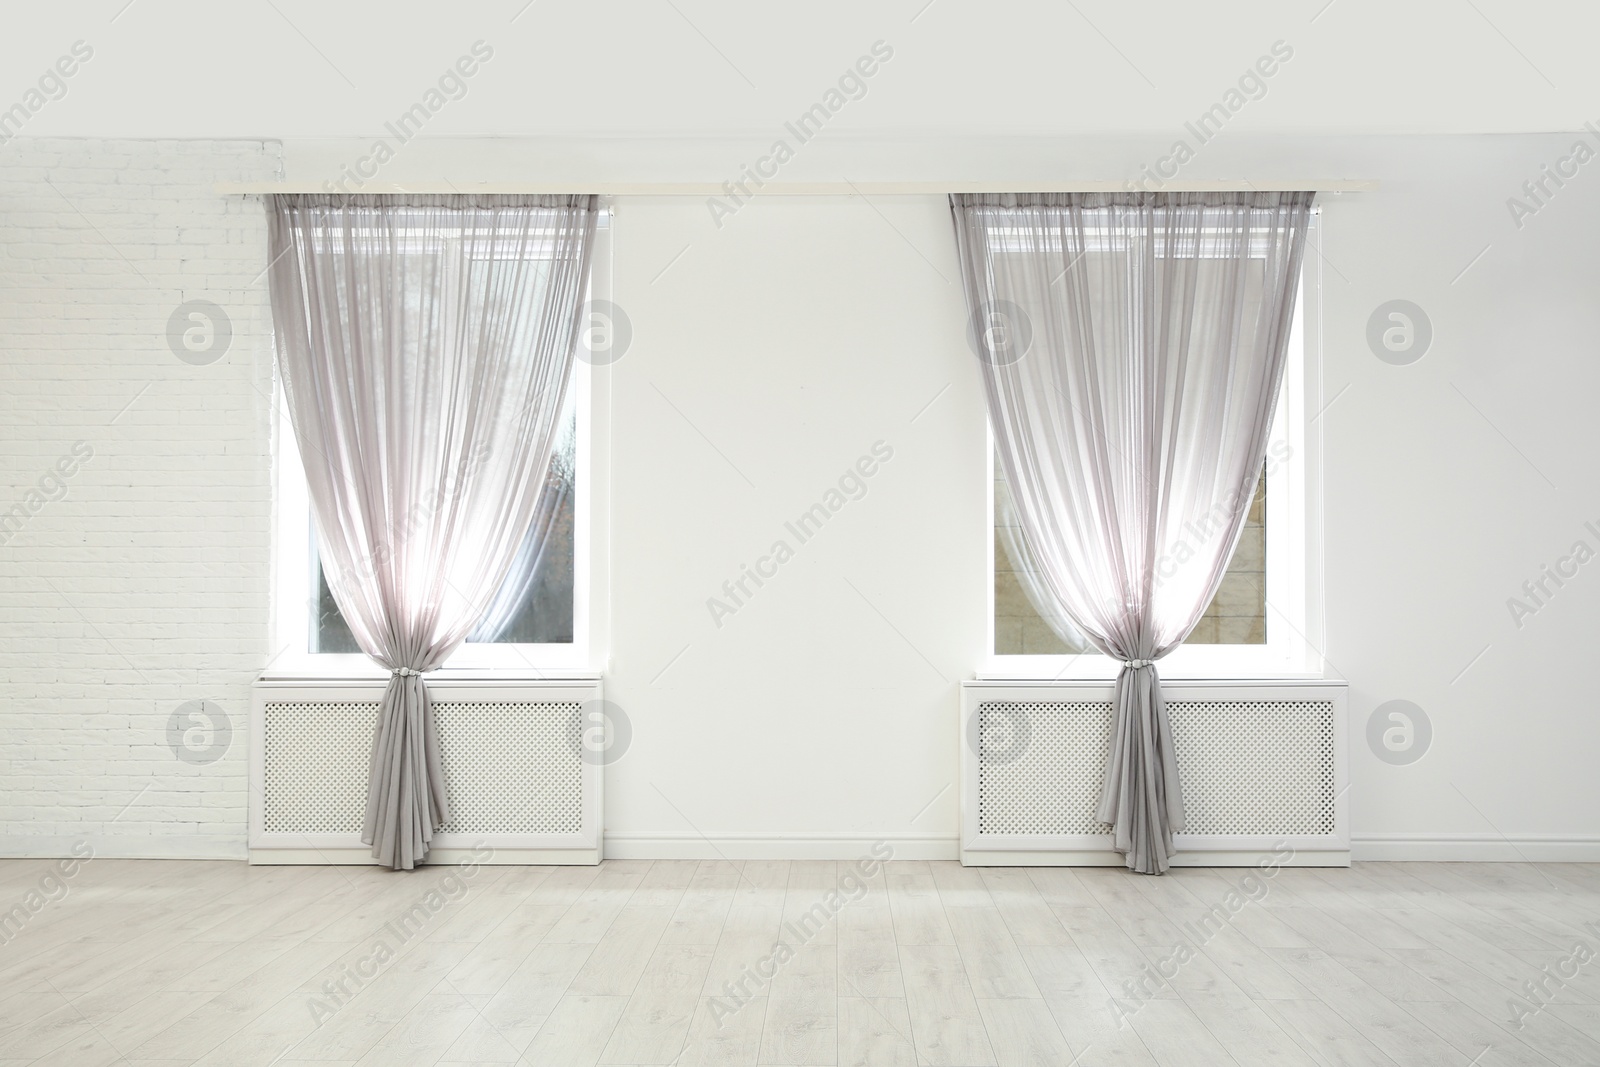 Photo of Modern windows with curtains in room. Home interior